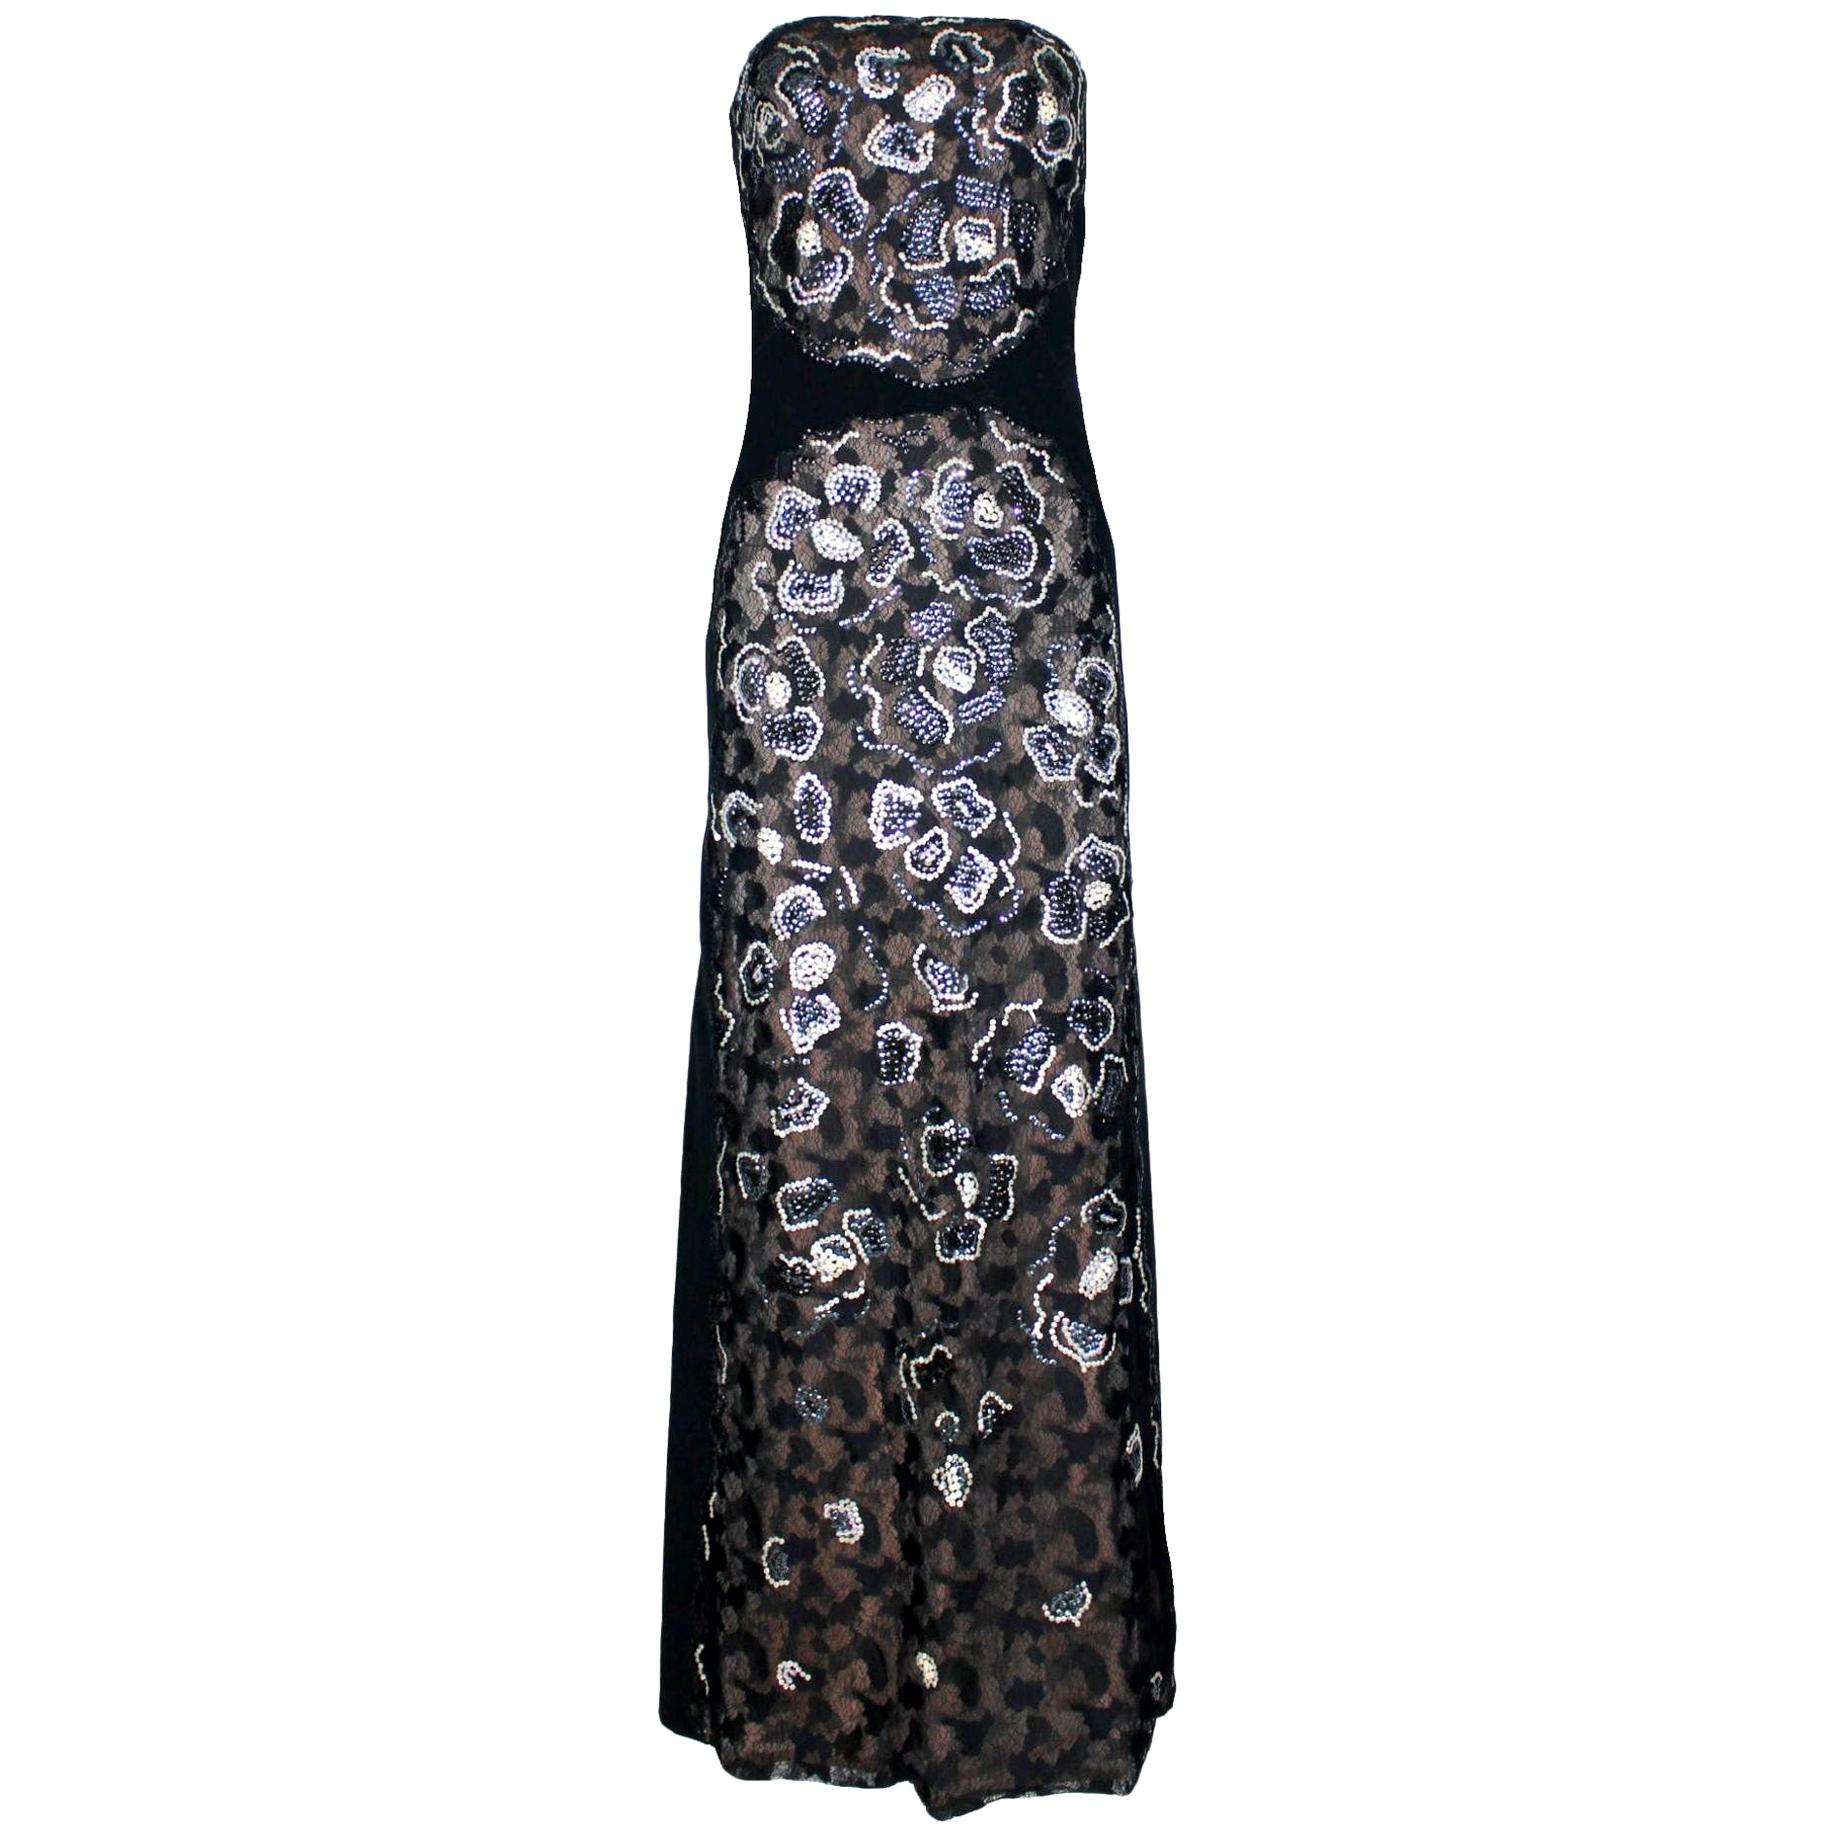 Unique Chanel Sequin Camellia Lace Embroidered Evening Dress Gown